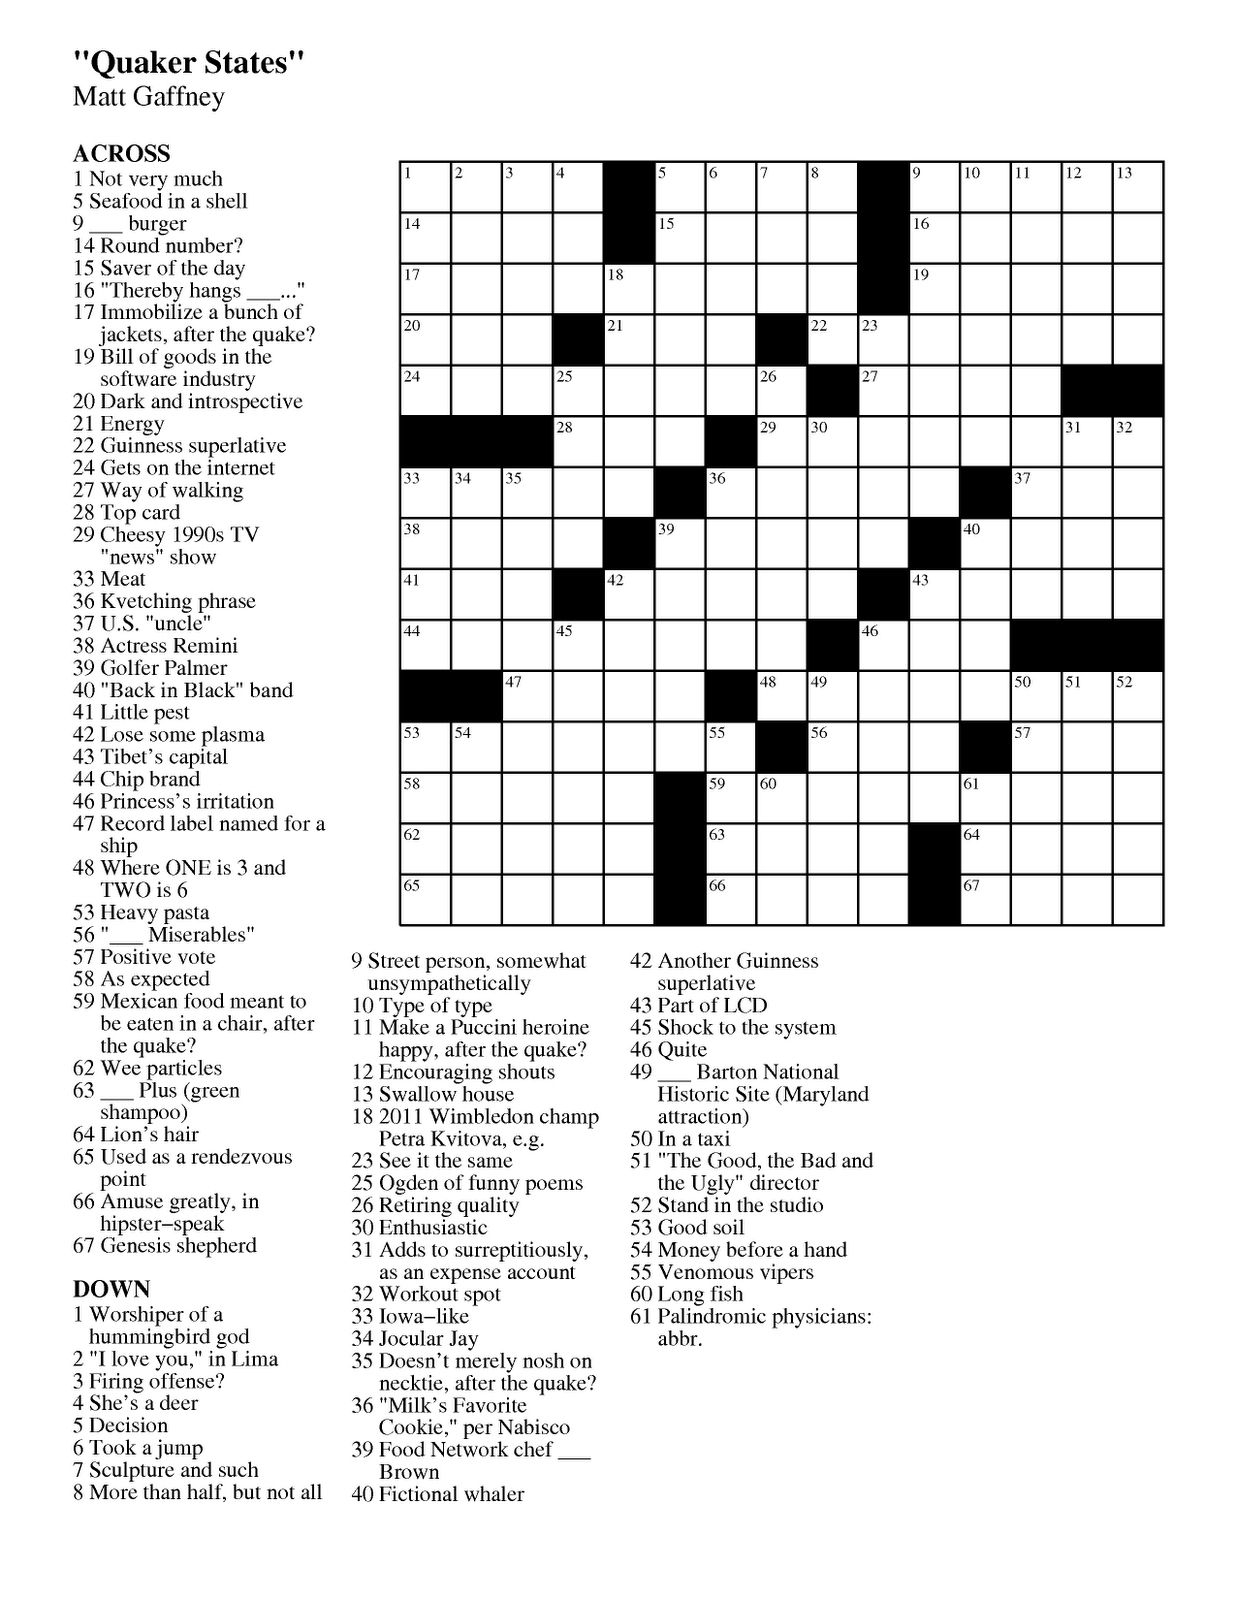 Online Crossword Puzzles For Middle School